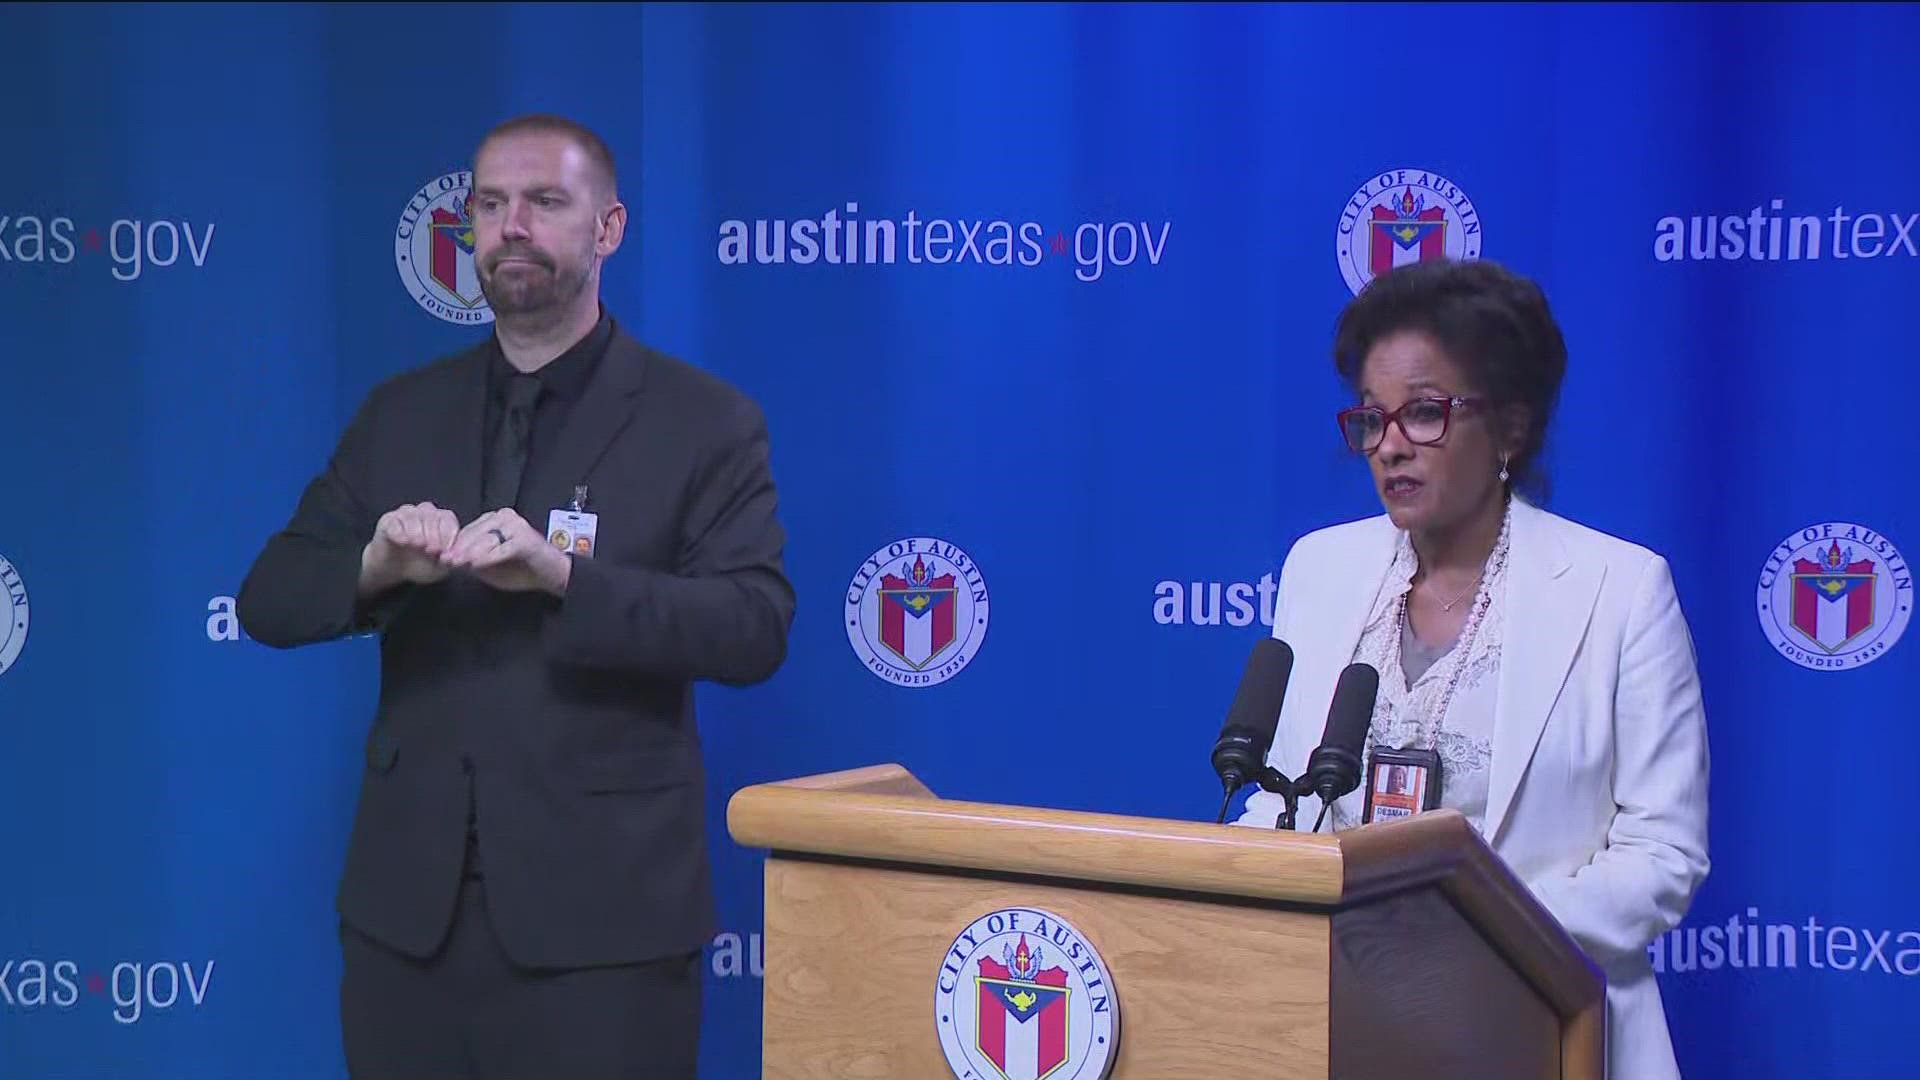 Austin and Travis County leaders declared a state of emergency because of monkeypox. Leaders stressed this declaration was different from COVID-19 warnings.